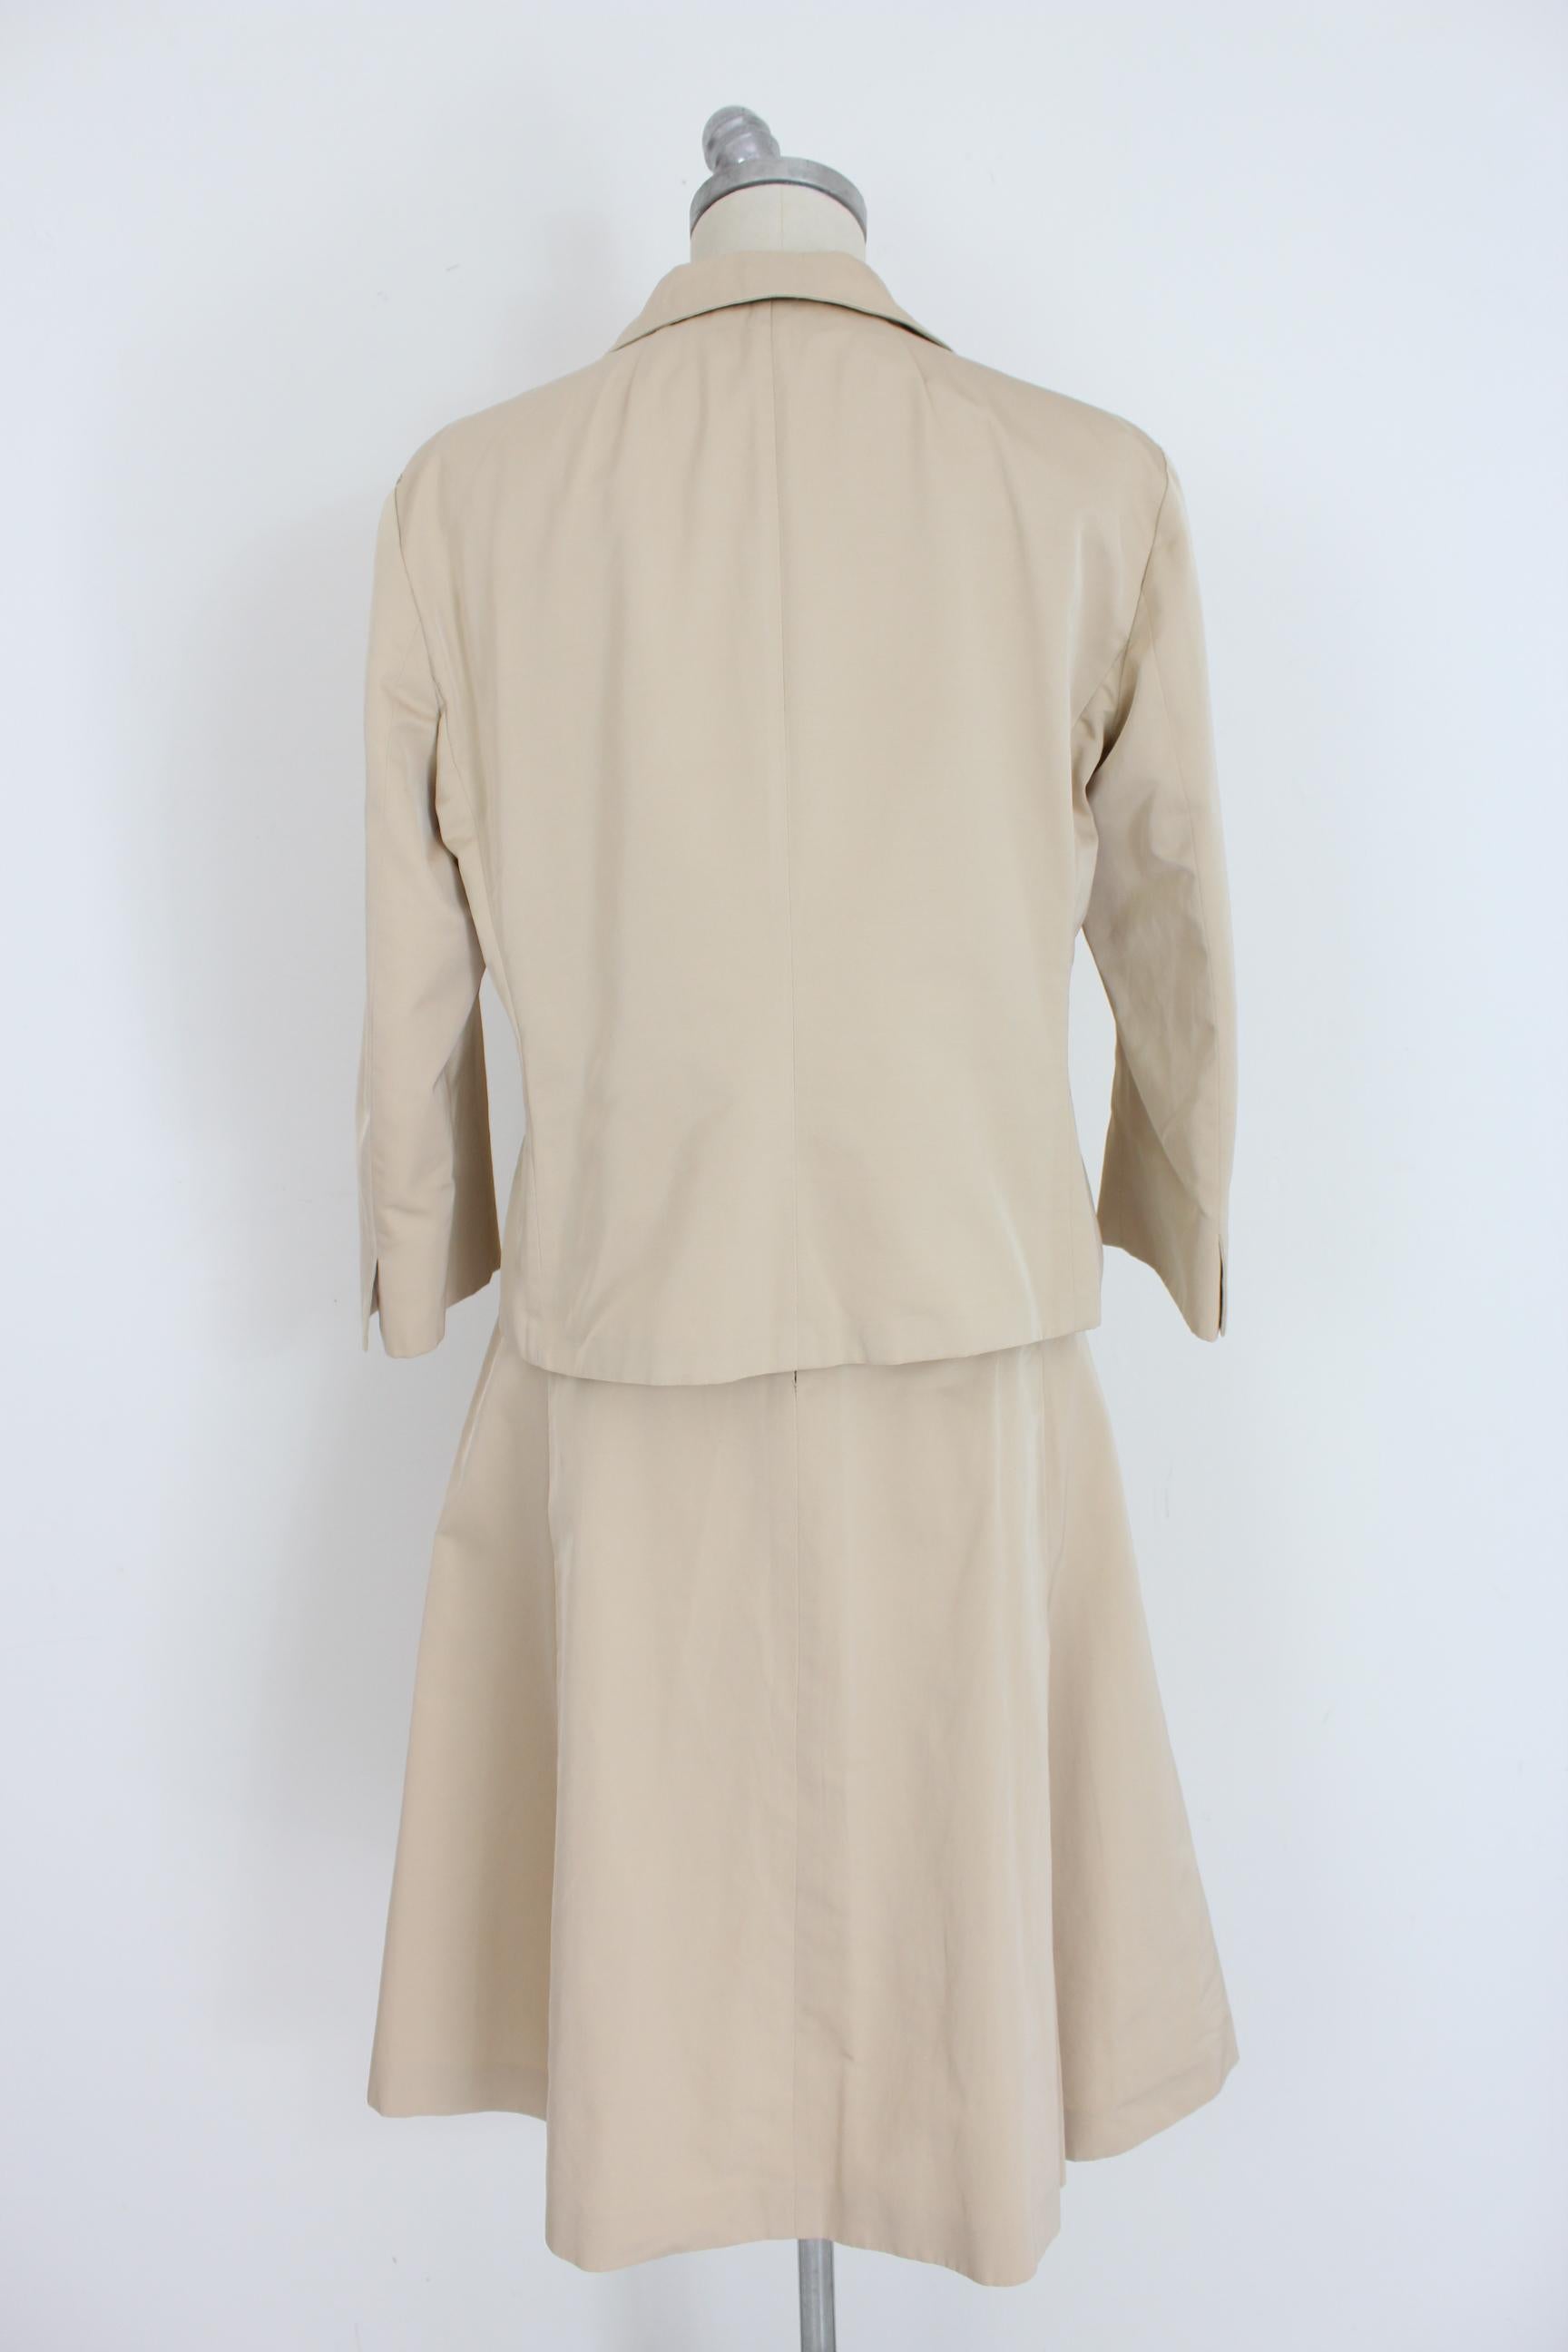 Max Mara 90s vintage women's suit skirt. Suit jacket and skirt. Short waist jacket with 3/4 sleeves, flared skirt with pleats. Beige. 61% polyester 39% cotton. Made in Italy. Excellent vintage conditions.

Size: 46 It 12 Us 14 Uk

Shoulder: 46